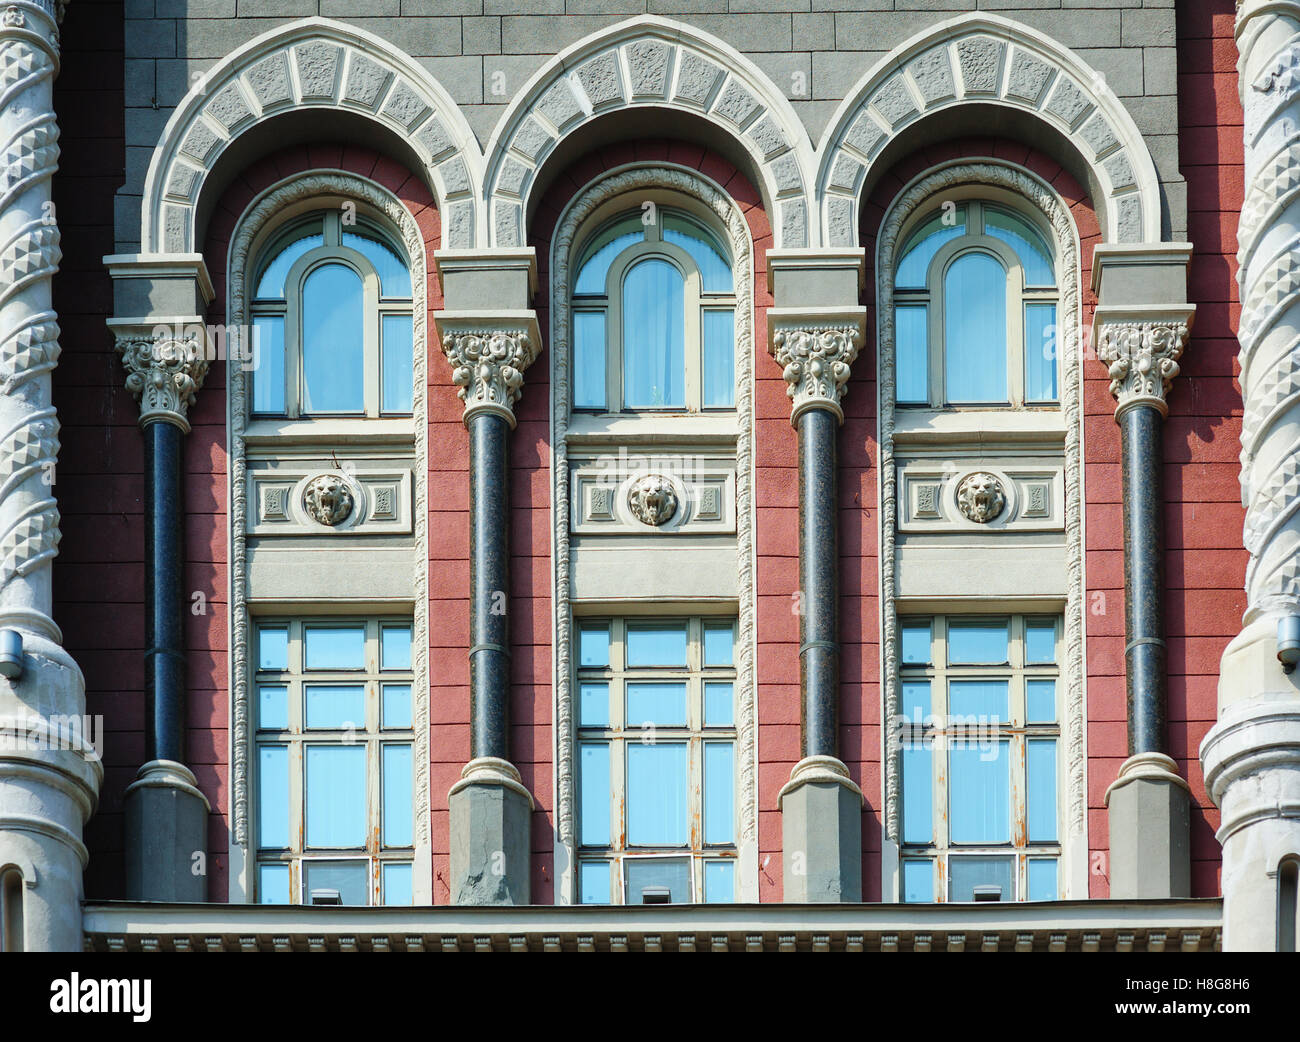 Windows with arches in old architectural building Stock Photo